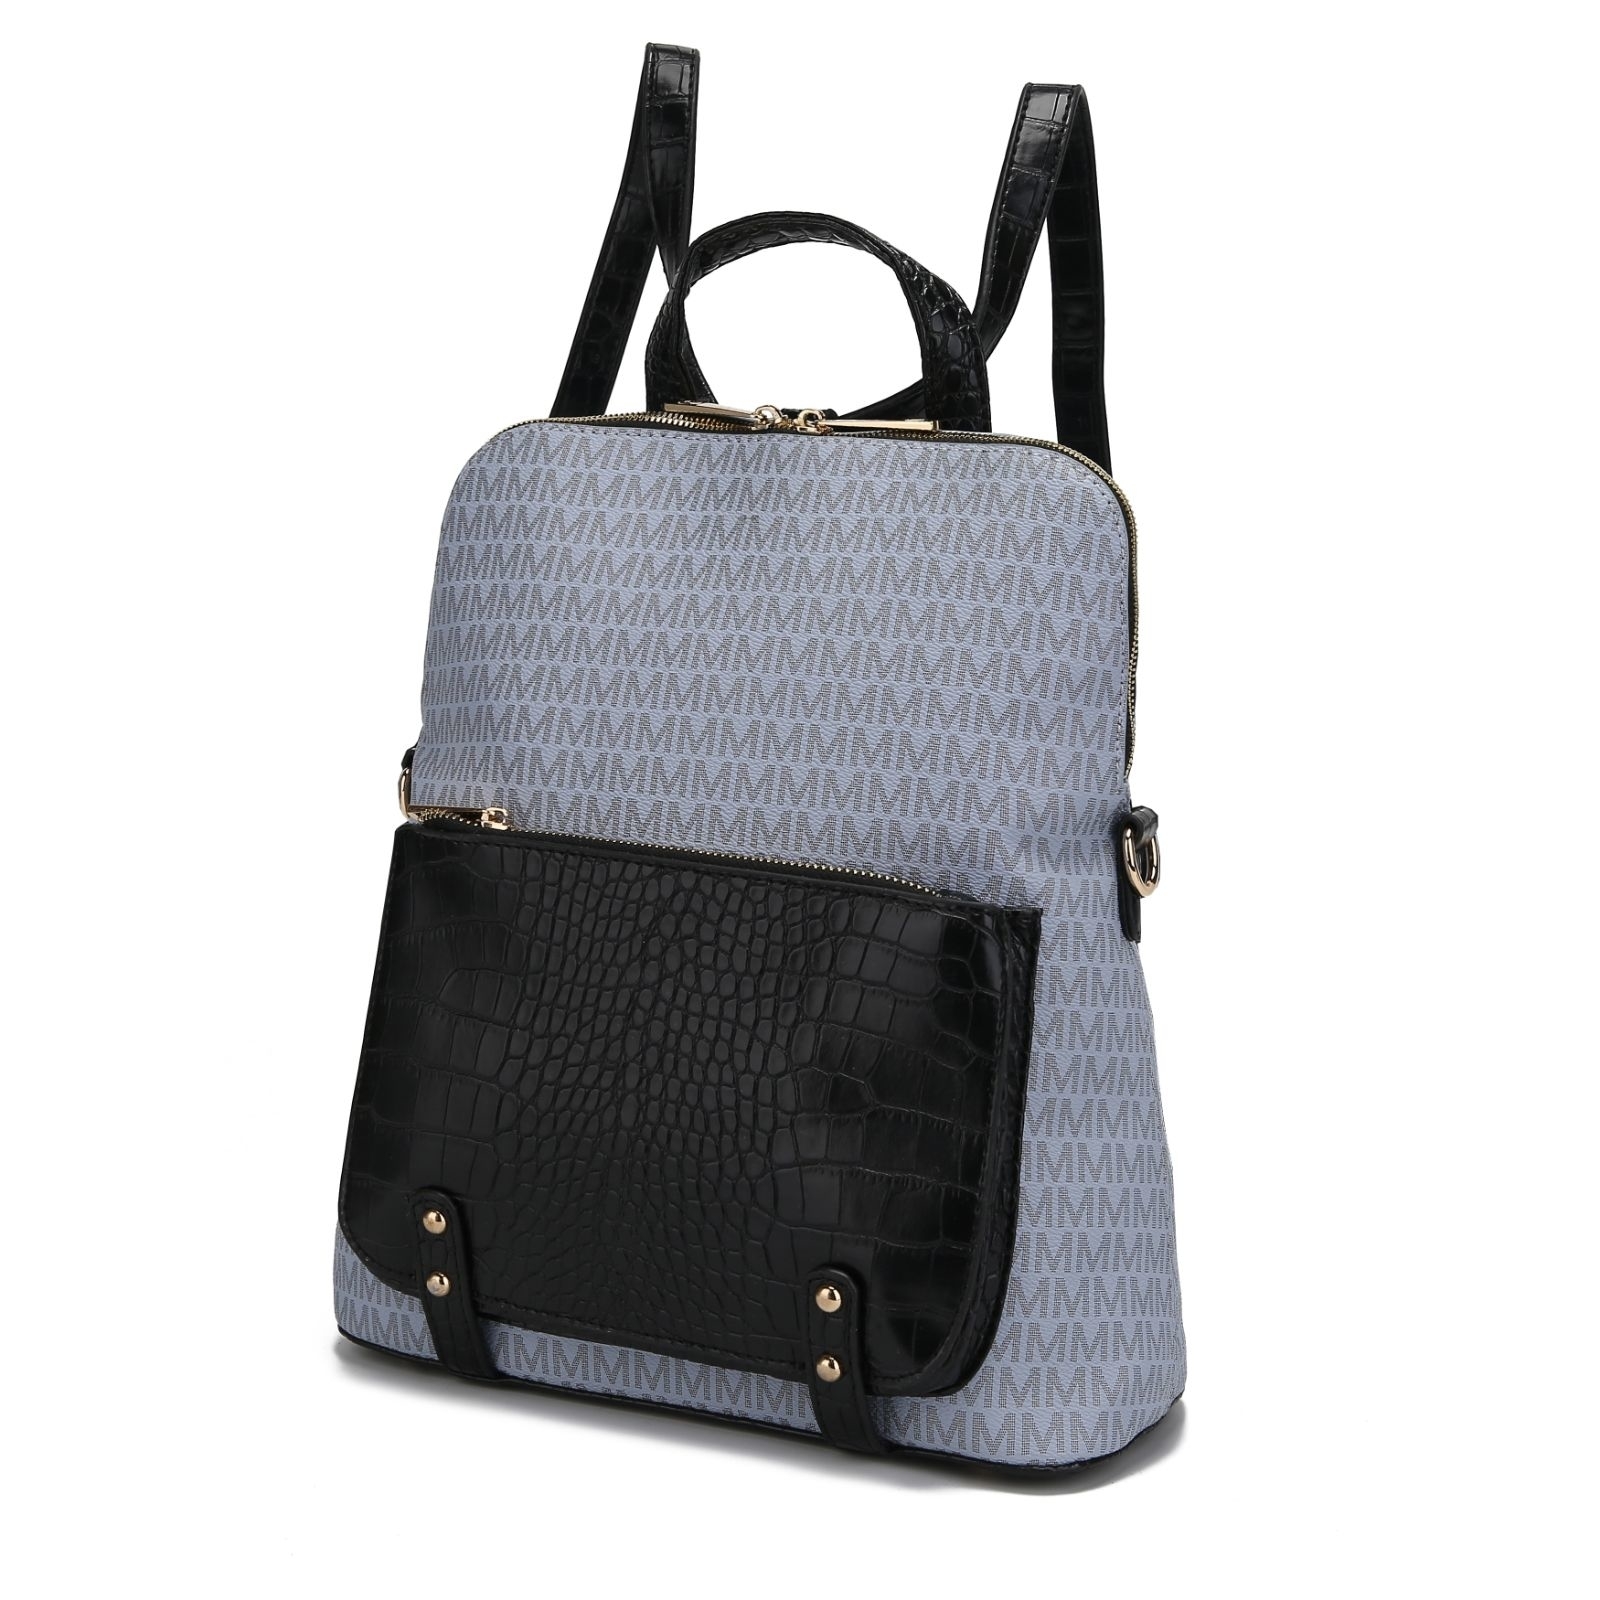 Mia K. Collection&nbsp;Rede Signature Backpack - image 5 of 10